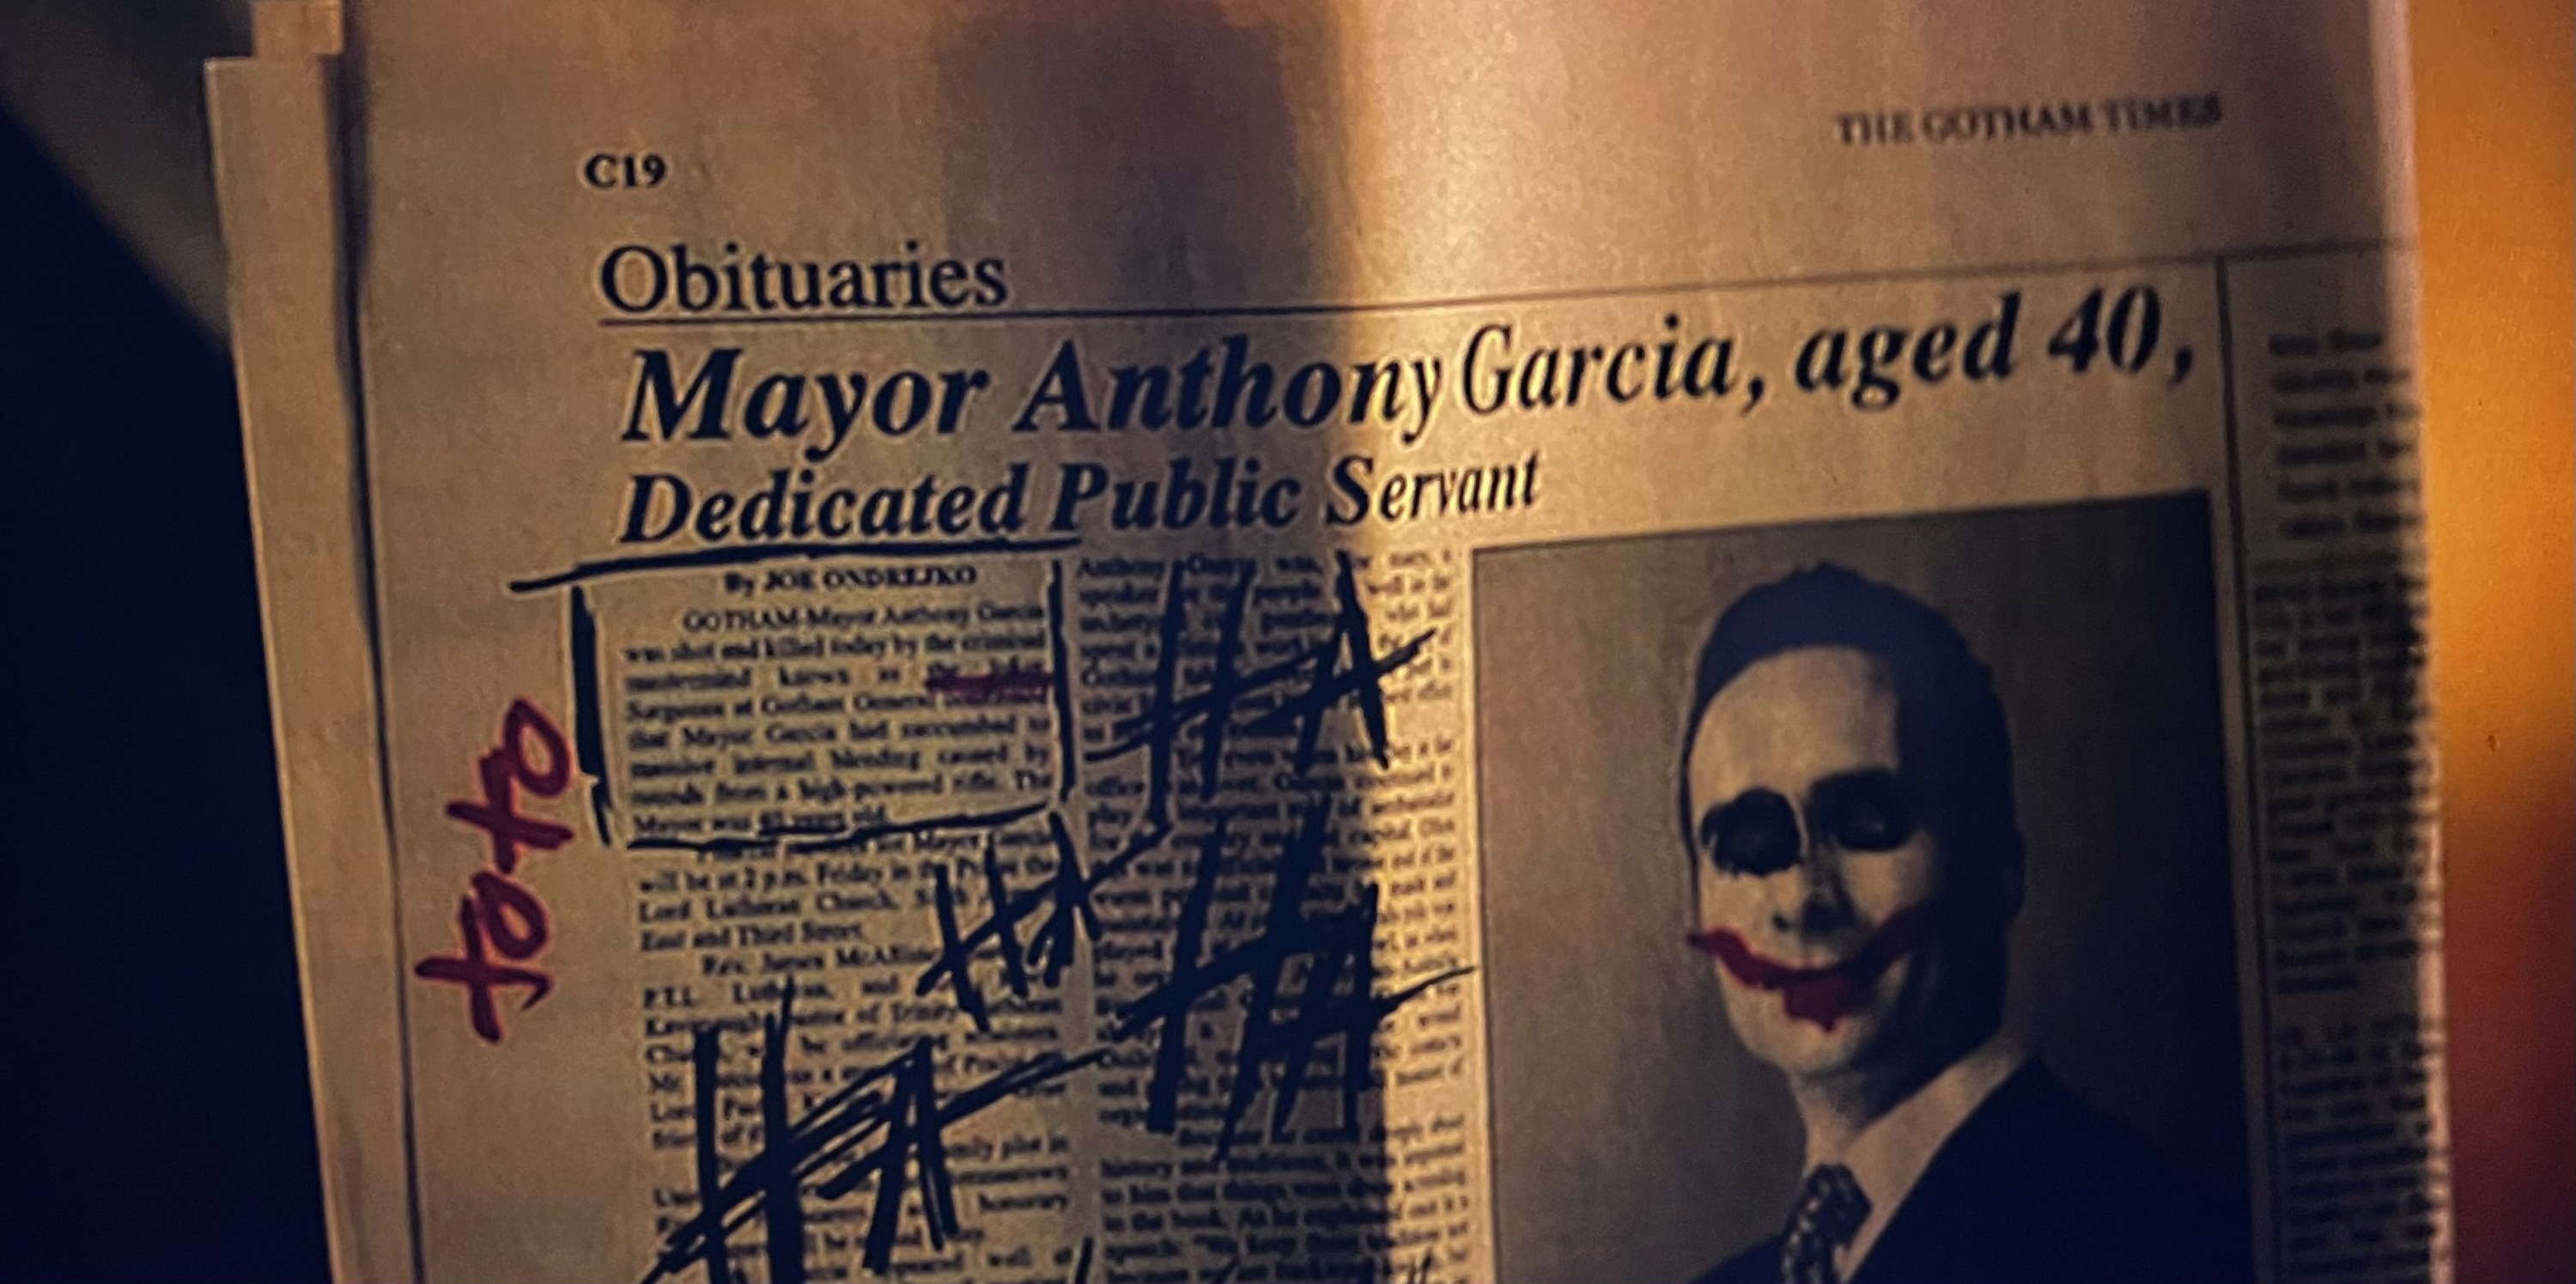 An obituary for the mayor of Gotham in The Dark Knight